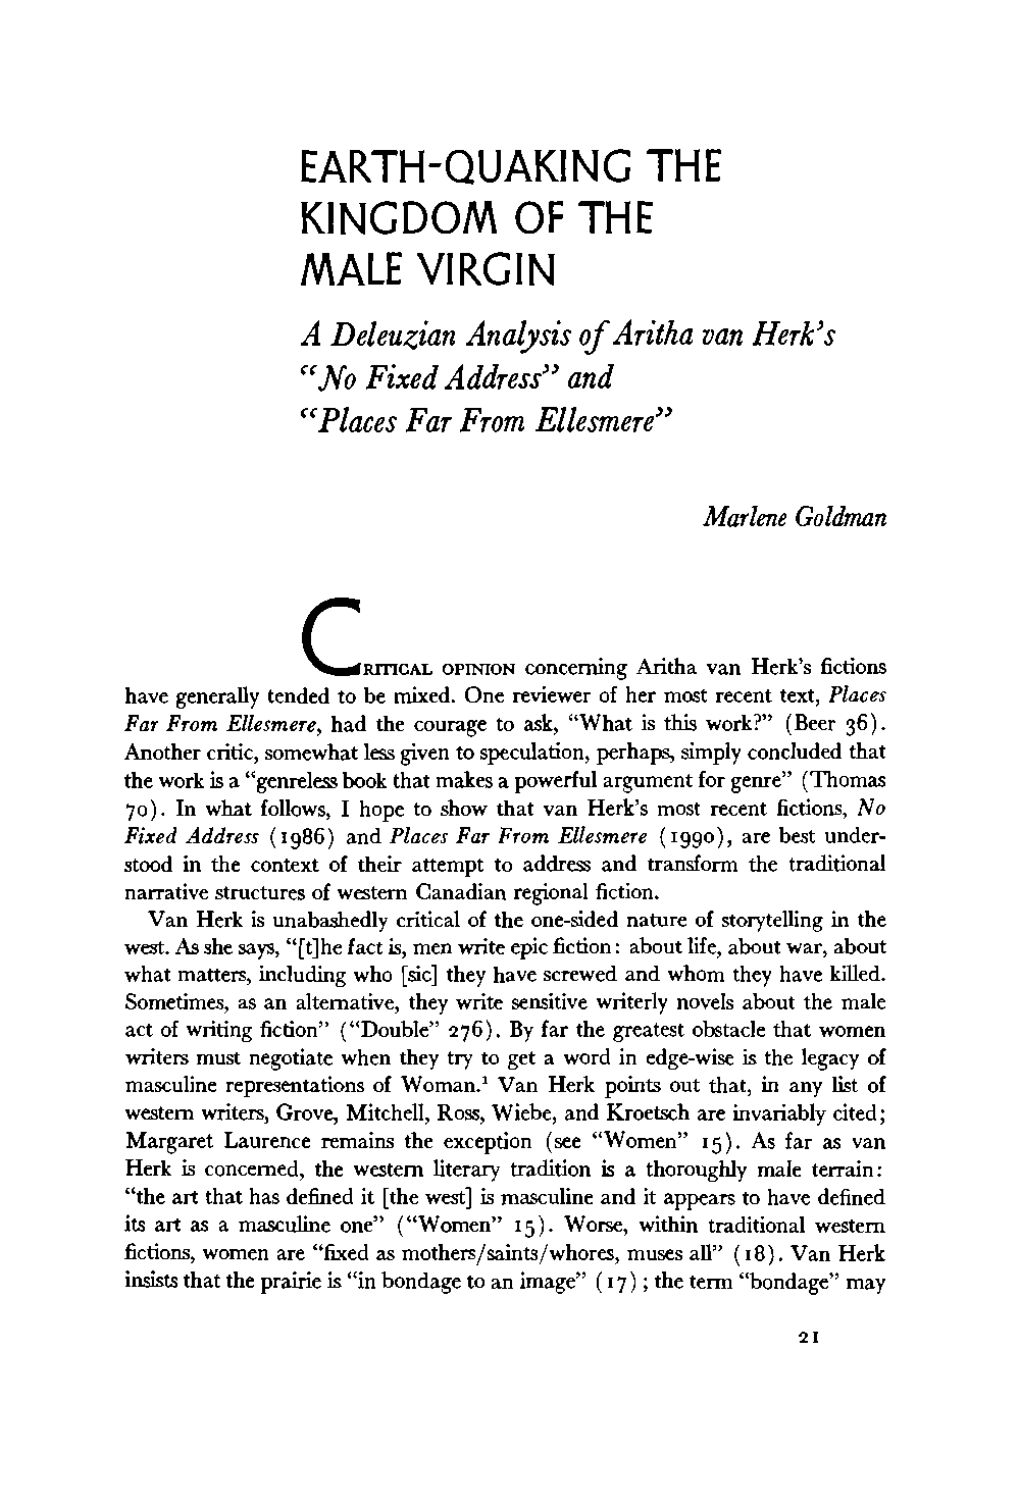 EARTH-QUAKING the KINGDOM of the MALE VIRGIN a Deleuzian Analysis Ofaritha Van Herk's "No Fixed Address" and "Places Far from Ellesmere"